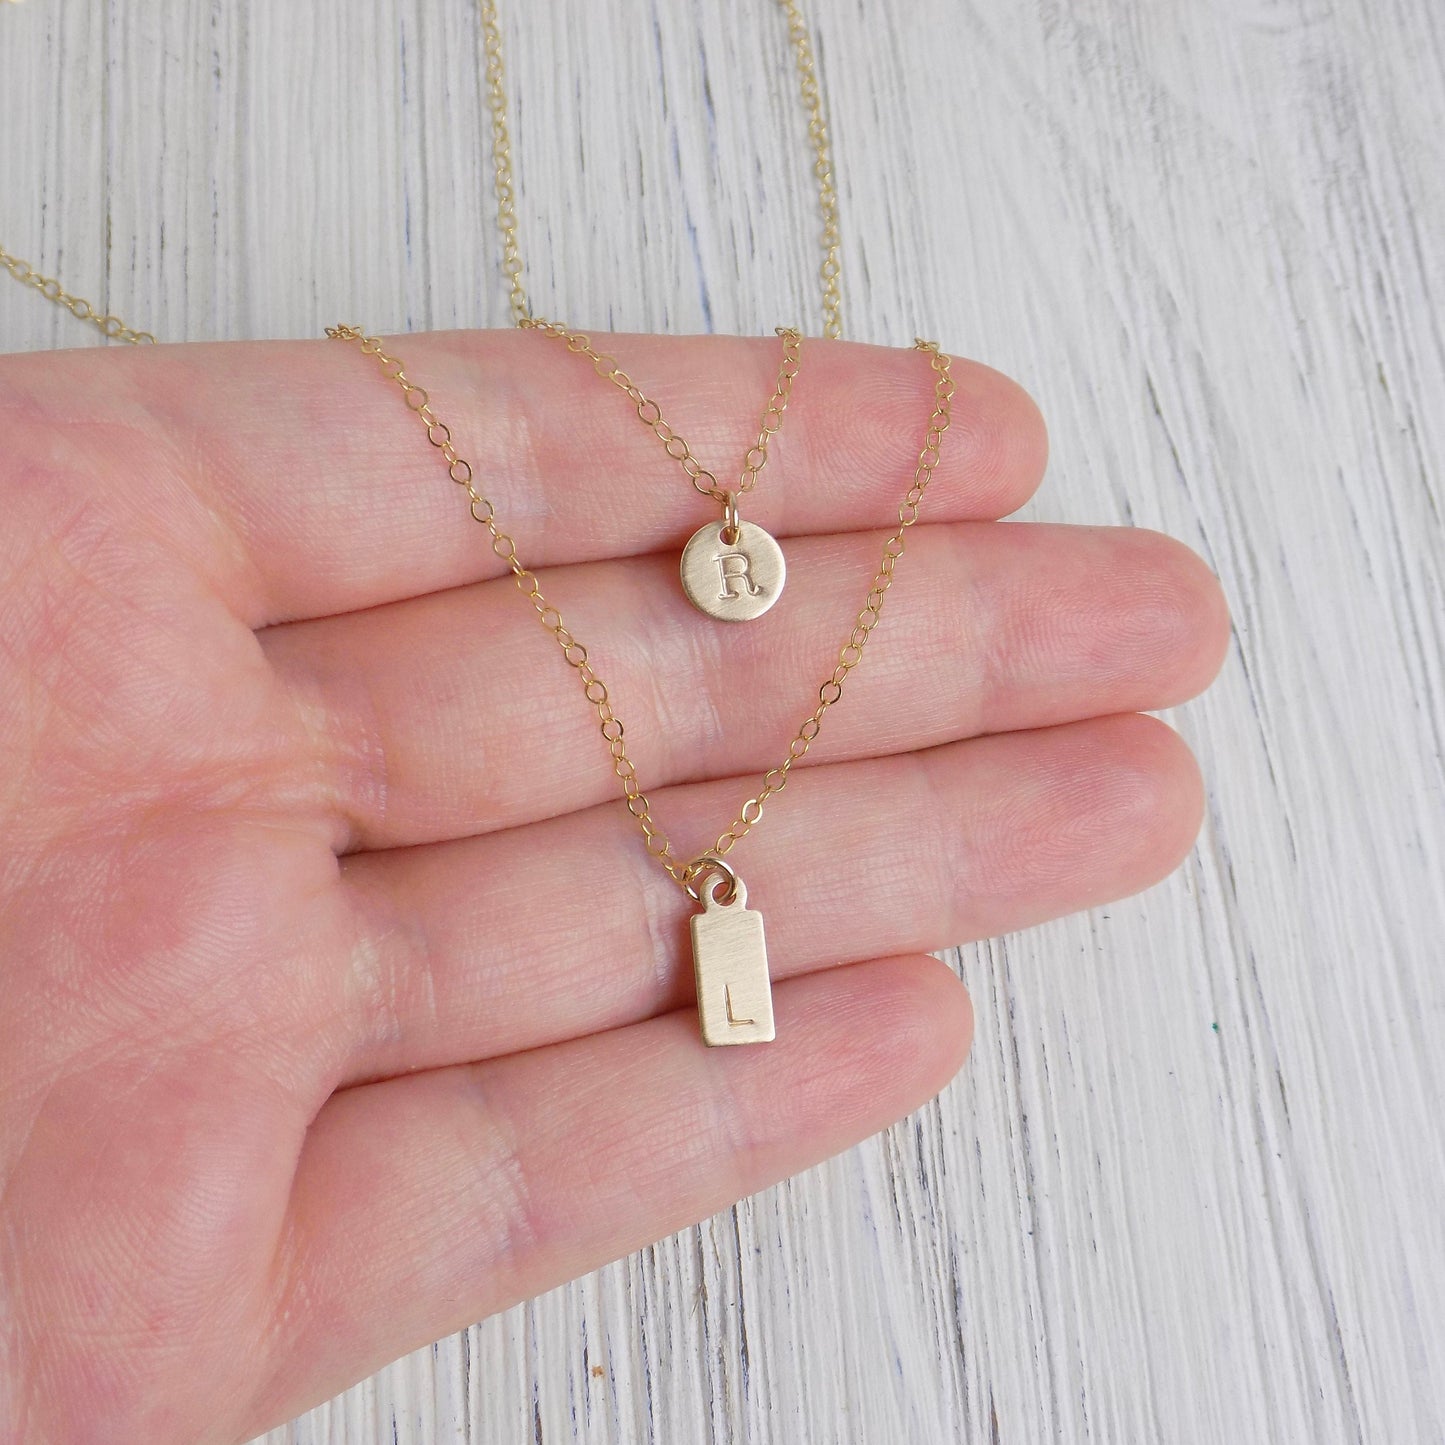 Layered Initial Necklaces - Dainty Initial Necklace Set Of 2 - 14K Gold Filled Brushed Matte Satin Finish - Christmas Gift Women - Z1-61